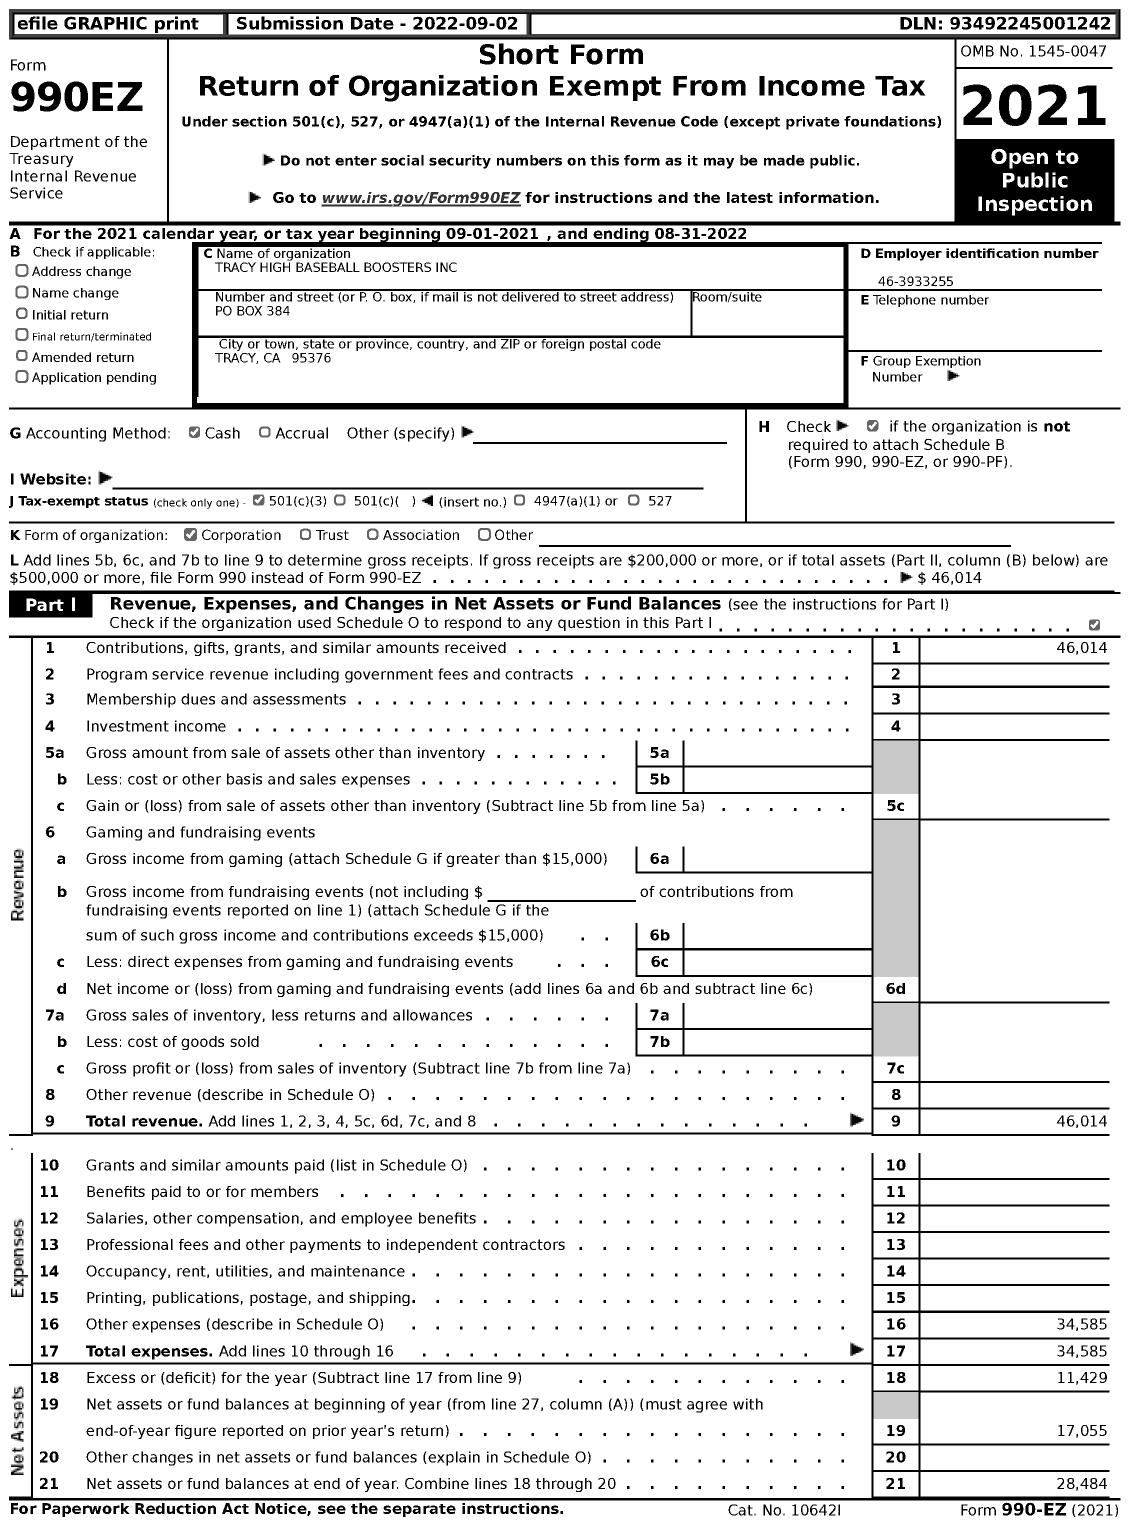 Image of first page of 2021 Form 990EZ for Tracy High Baseball Boosters